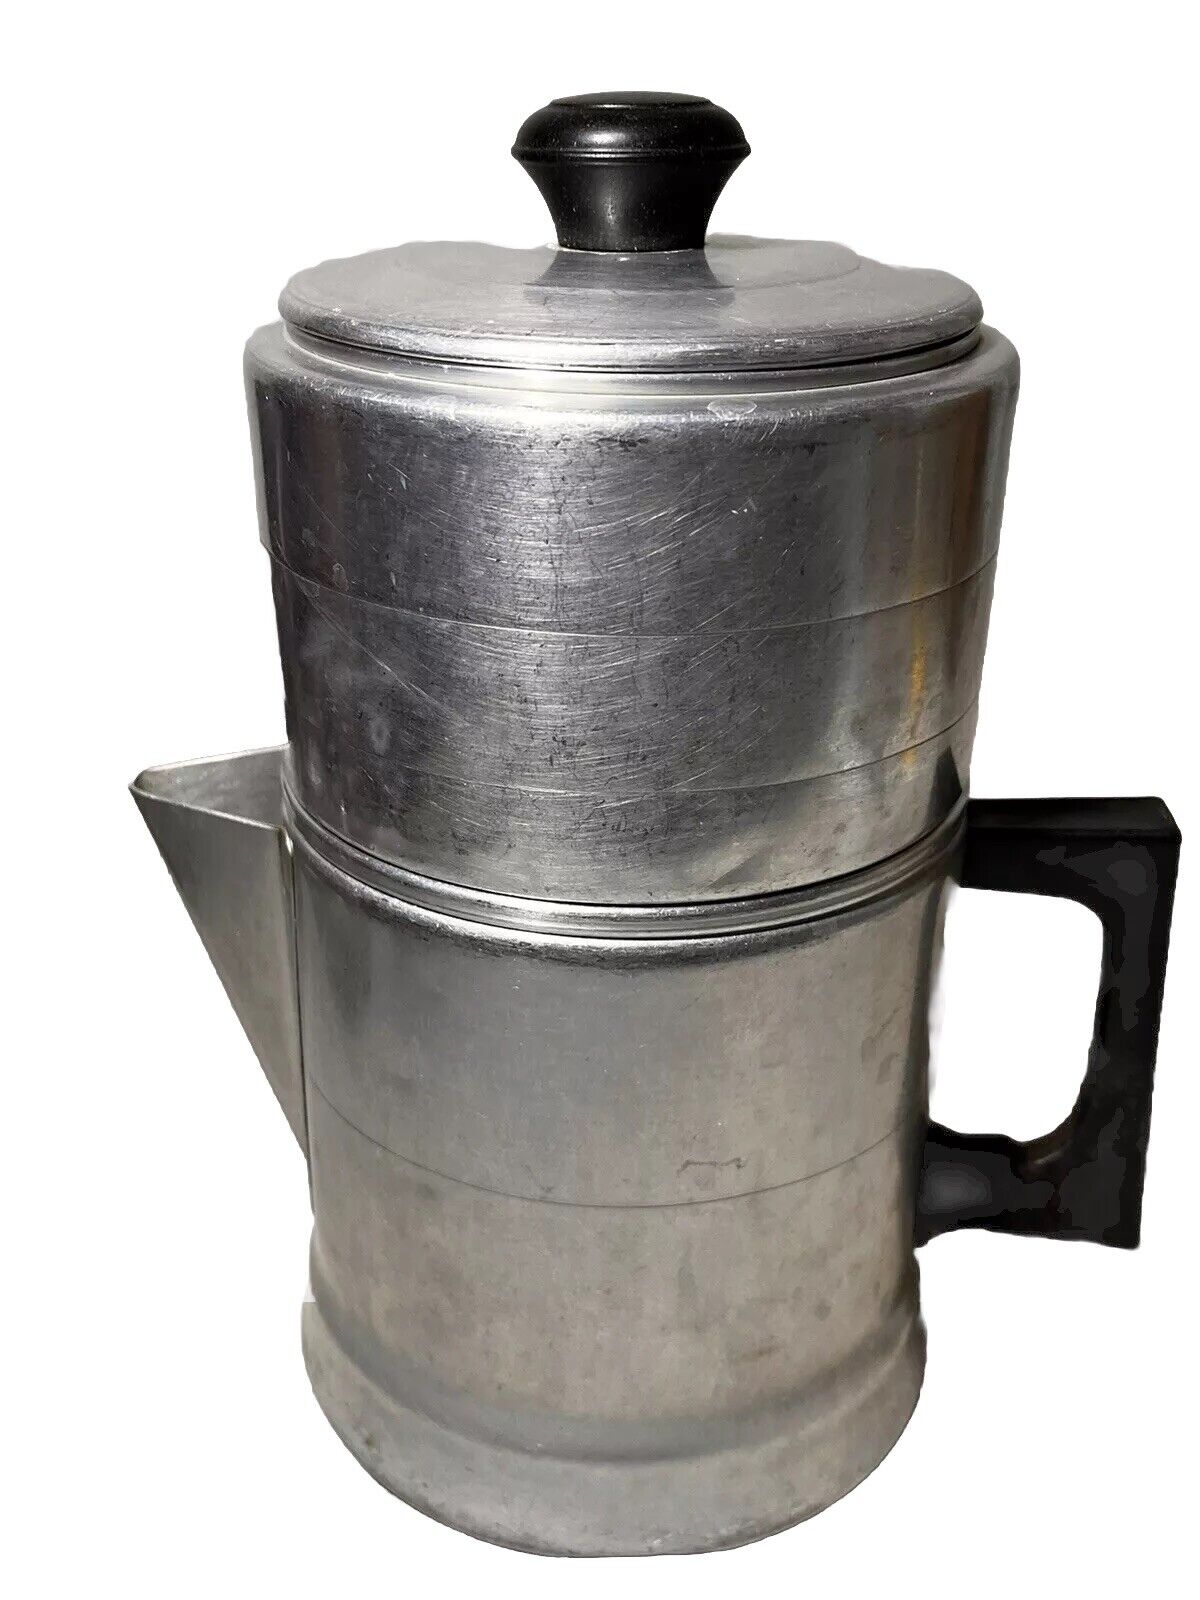 Vintage Sears Aluminum Drip Coffee Pot Stove Top or Campfire 2-7 Cups 1950\'s USA